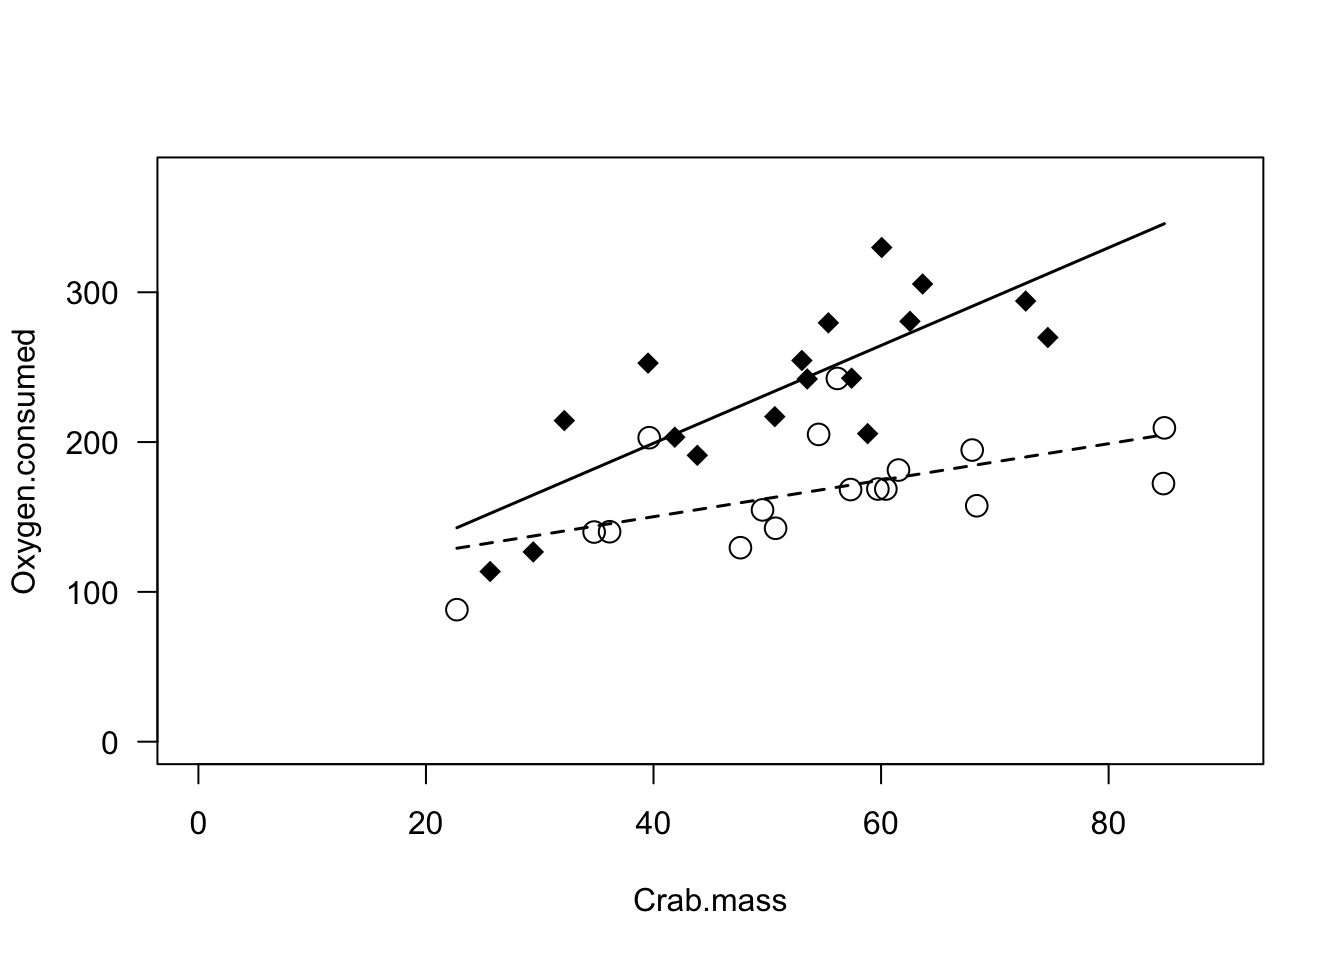 *Figure 1: The relationship between body mass and oxygen consumption in shore crabs. Individuals in the 'Ambient' treatment shown in open circles, individuals in 'Ship' treatment shown in filled diamonds.*